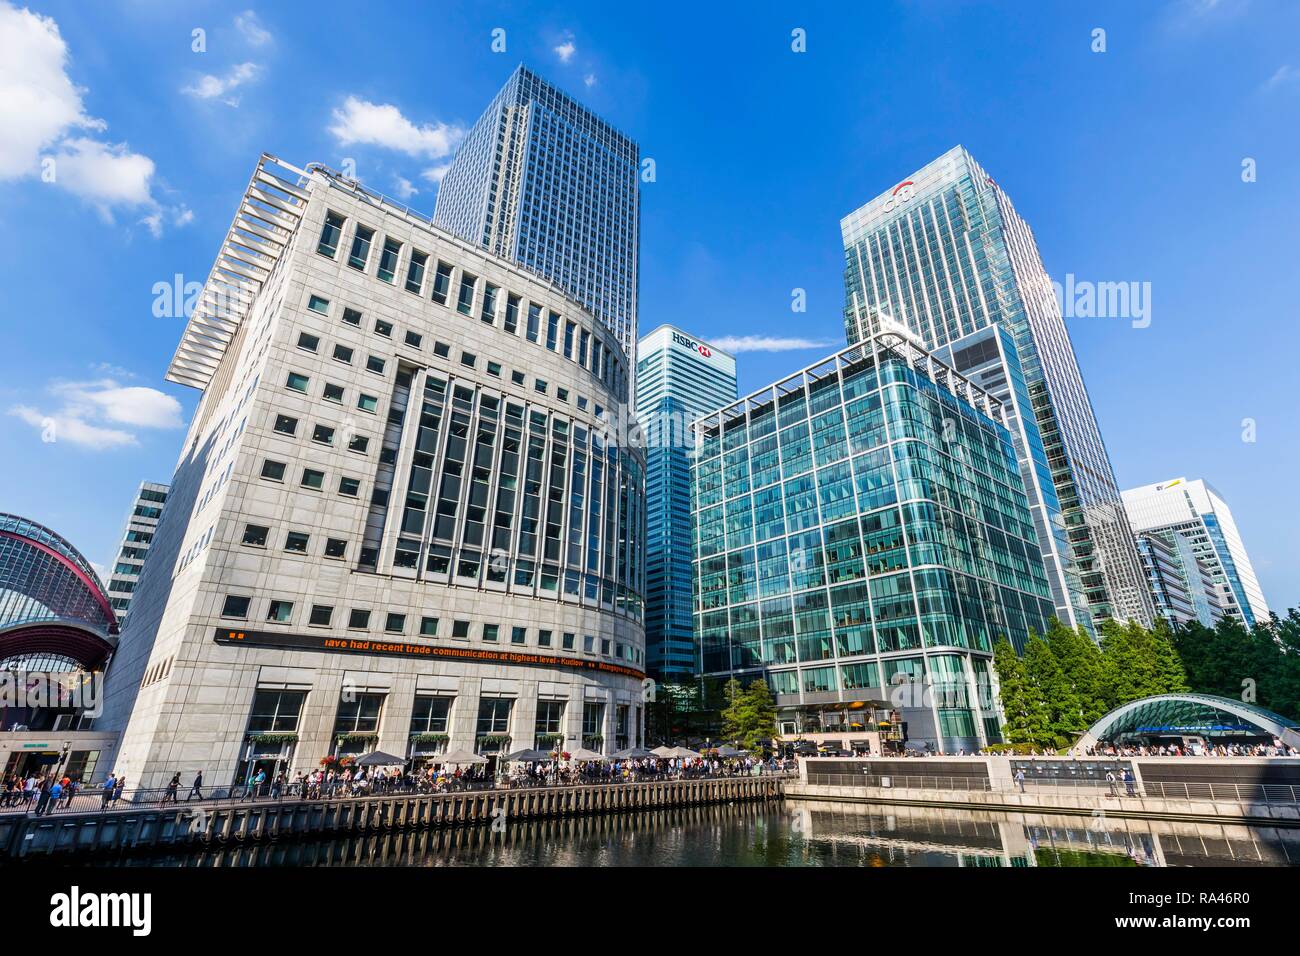 Thomson Reuters News Agency Headquarters, Canary Wharf Tower, Citi Bank Headquarters Citigroup Centre and HSBC Bank Headquarters Stock Photo